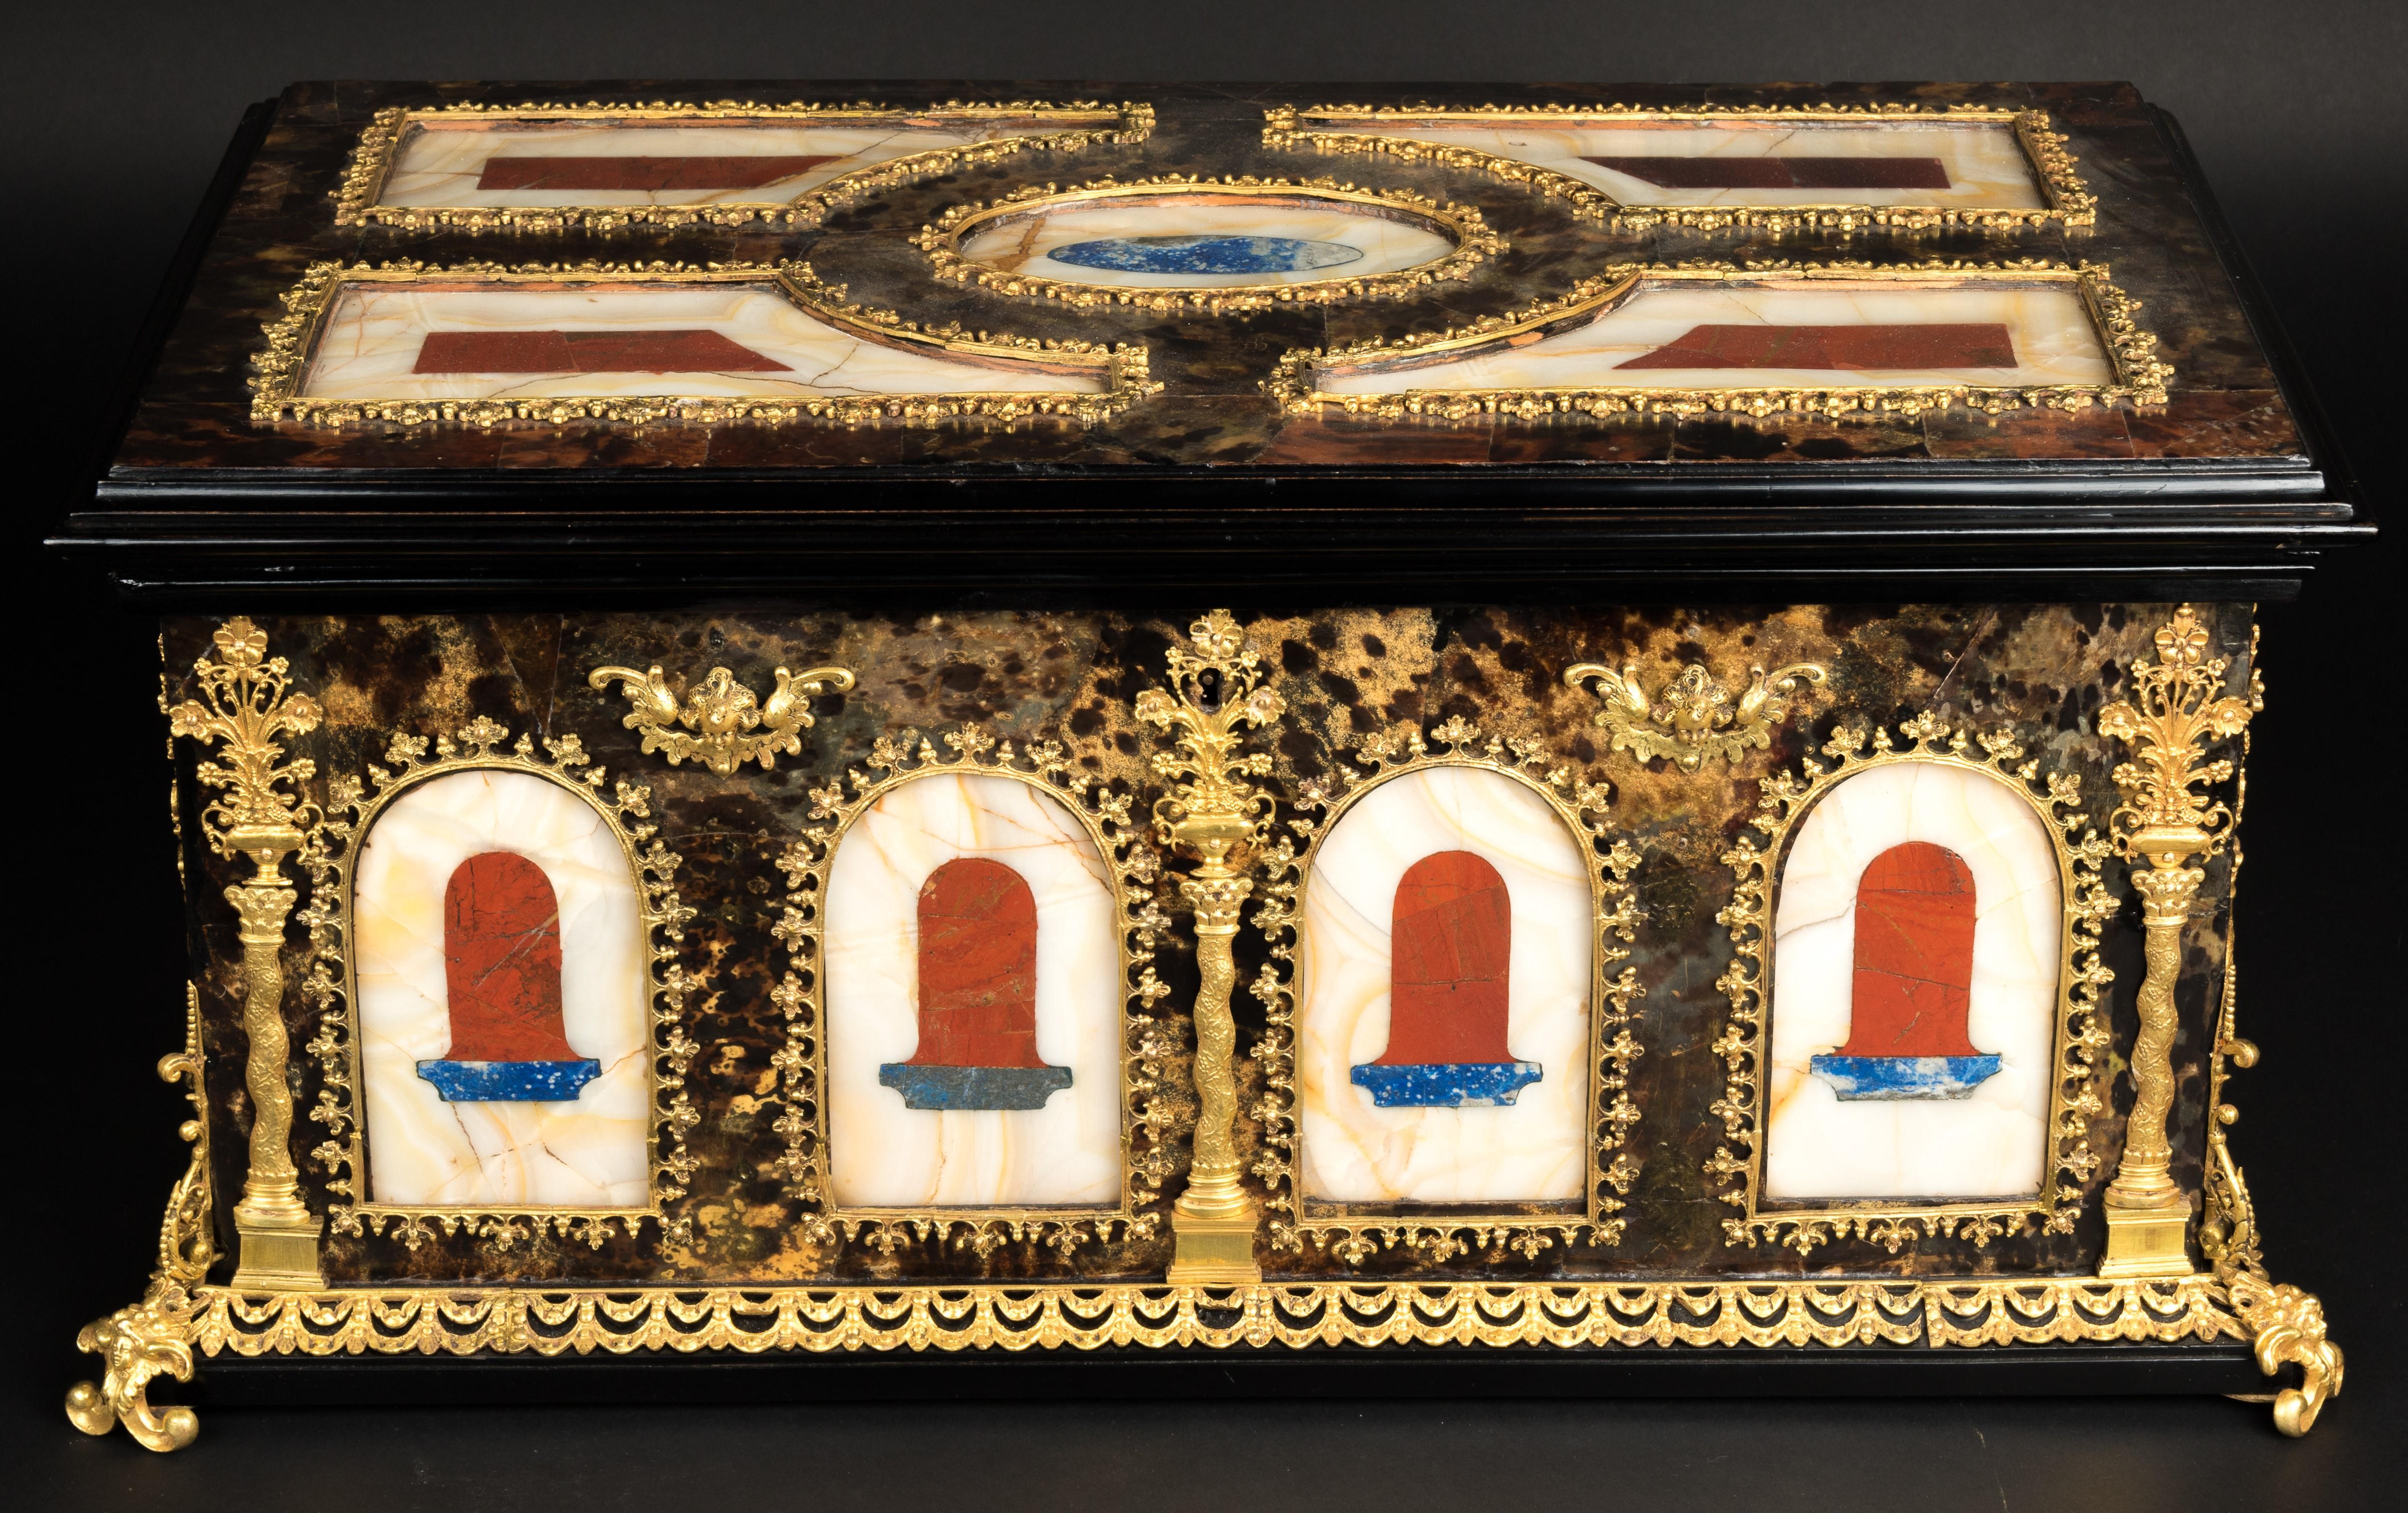 A pair of Italian boxes in marble and bronze covered in tortoiseshell, circa 1860.
The boxes are finely chiseled in bronze gilded and inlaid with Lapis Lazuli which is a deep blue matamorphic rock used as a semi-precious stone.